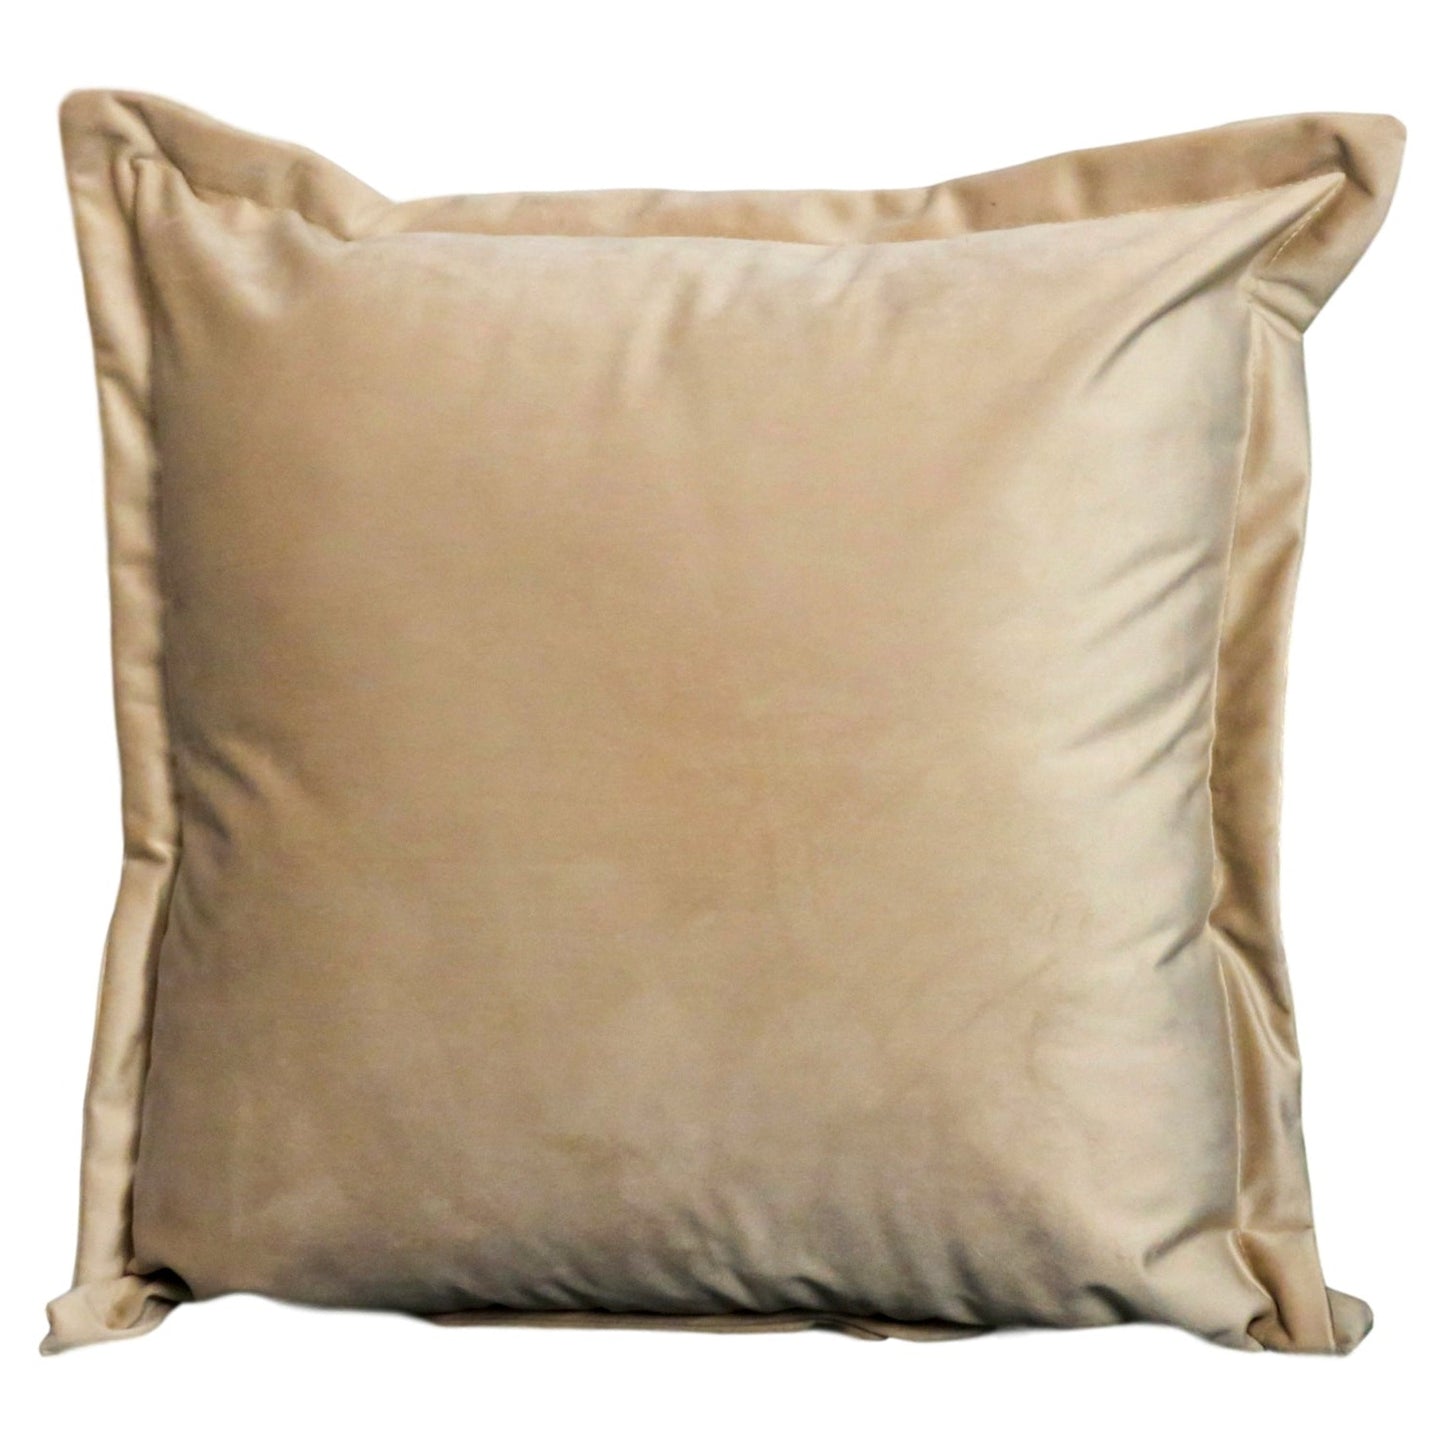 Beige velvet cushion - feather filled by Native